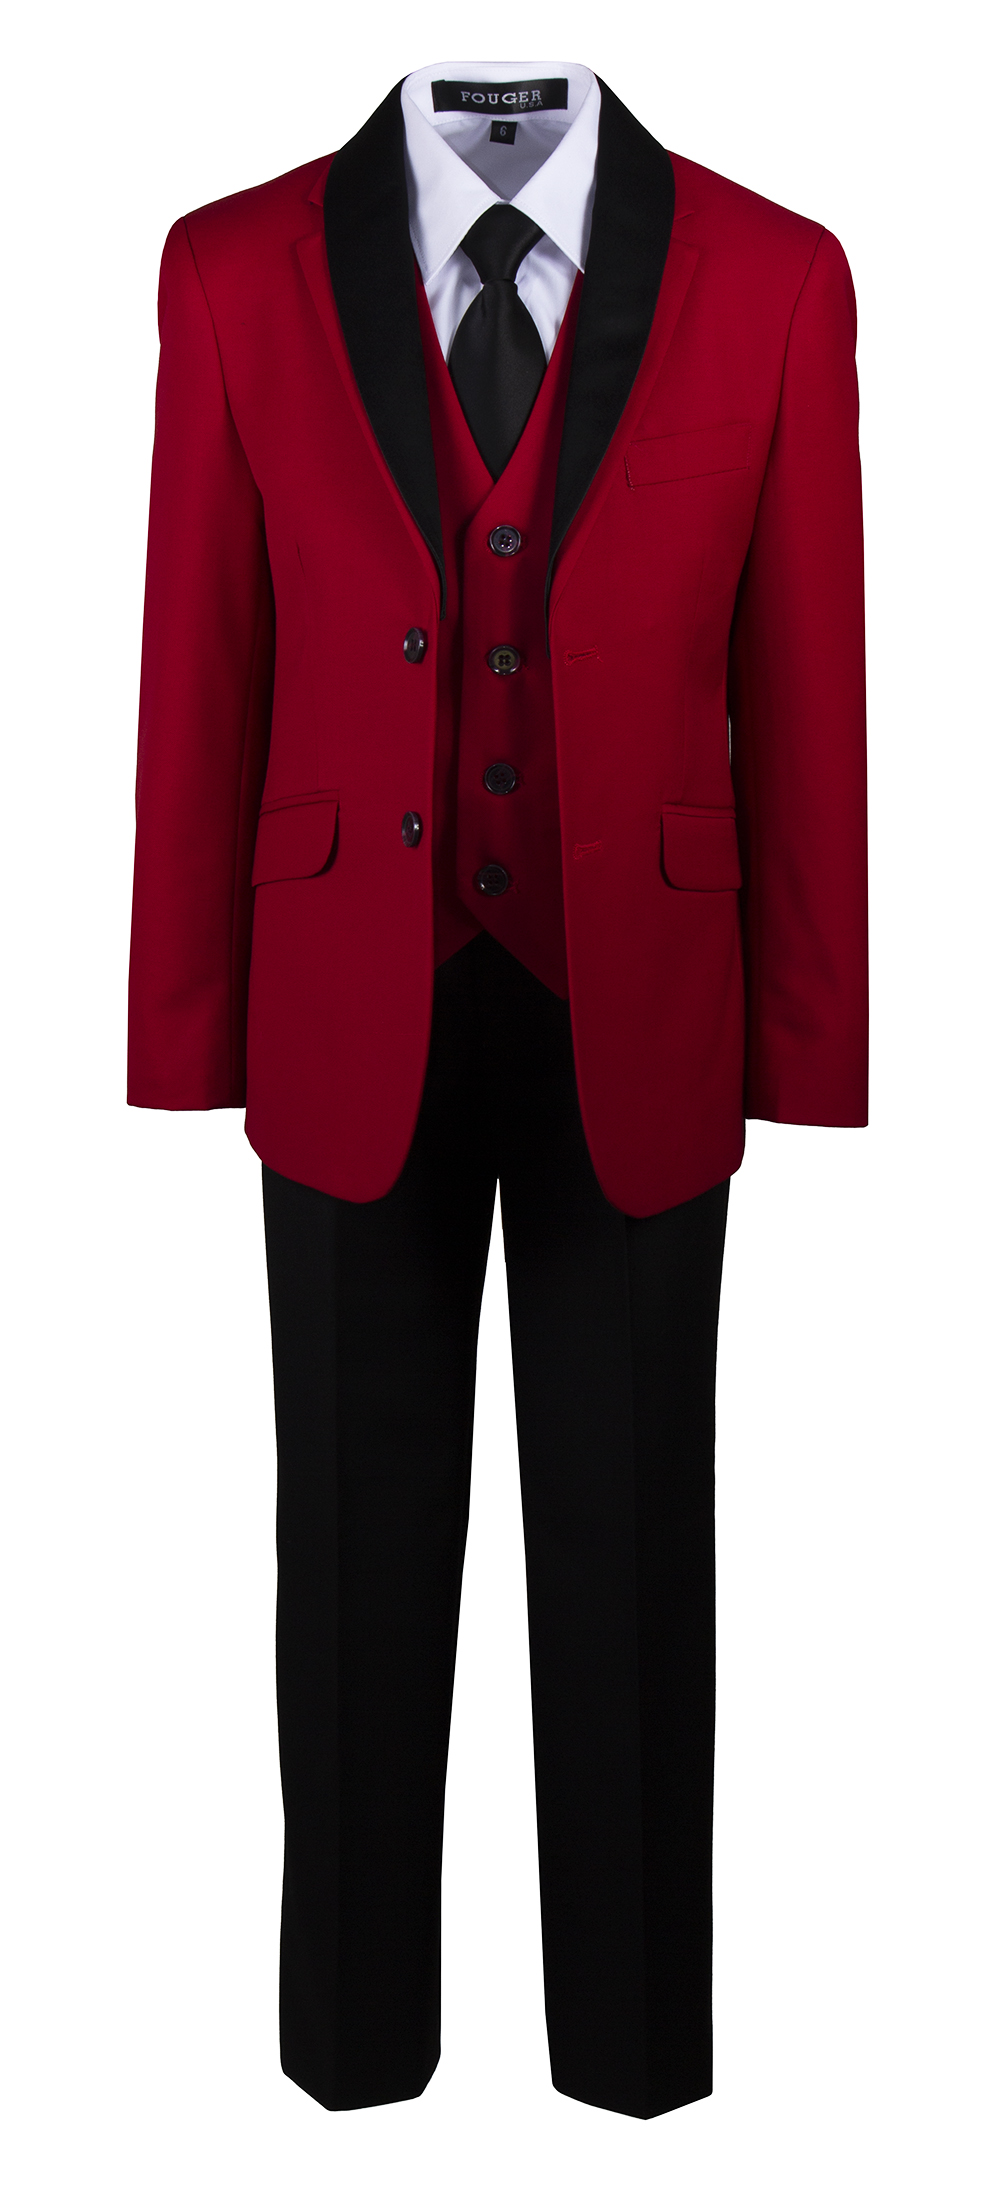 BJK Collection Boys Slim Fit Red and Black Tuxedo Suit with Removable Lapel